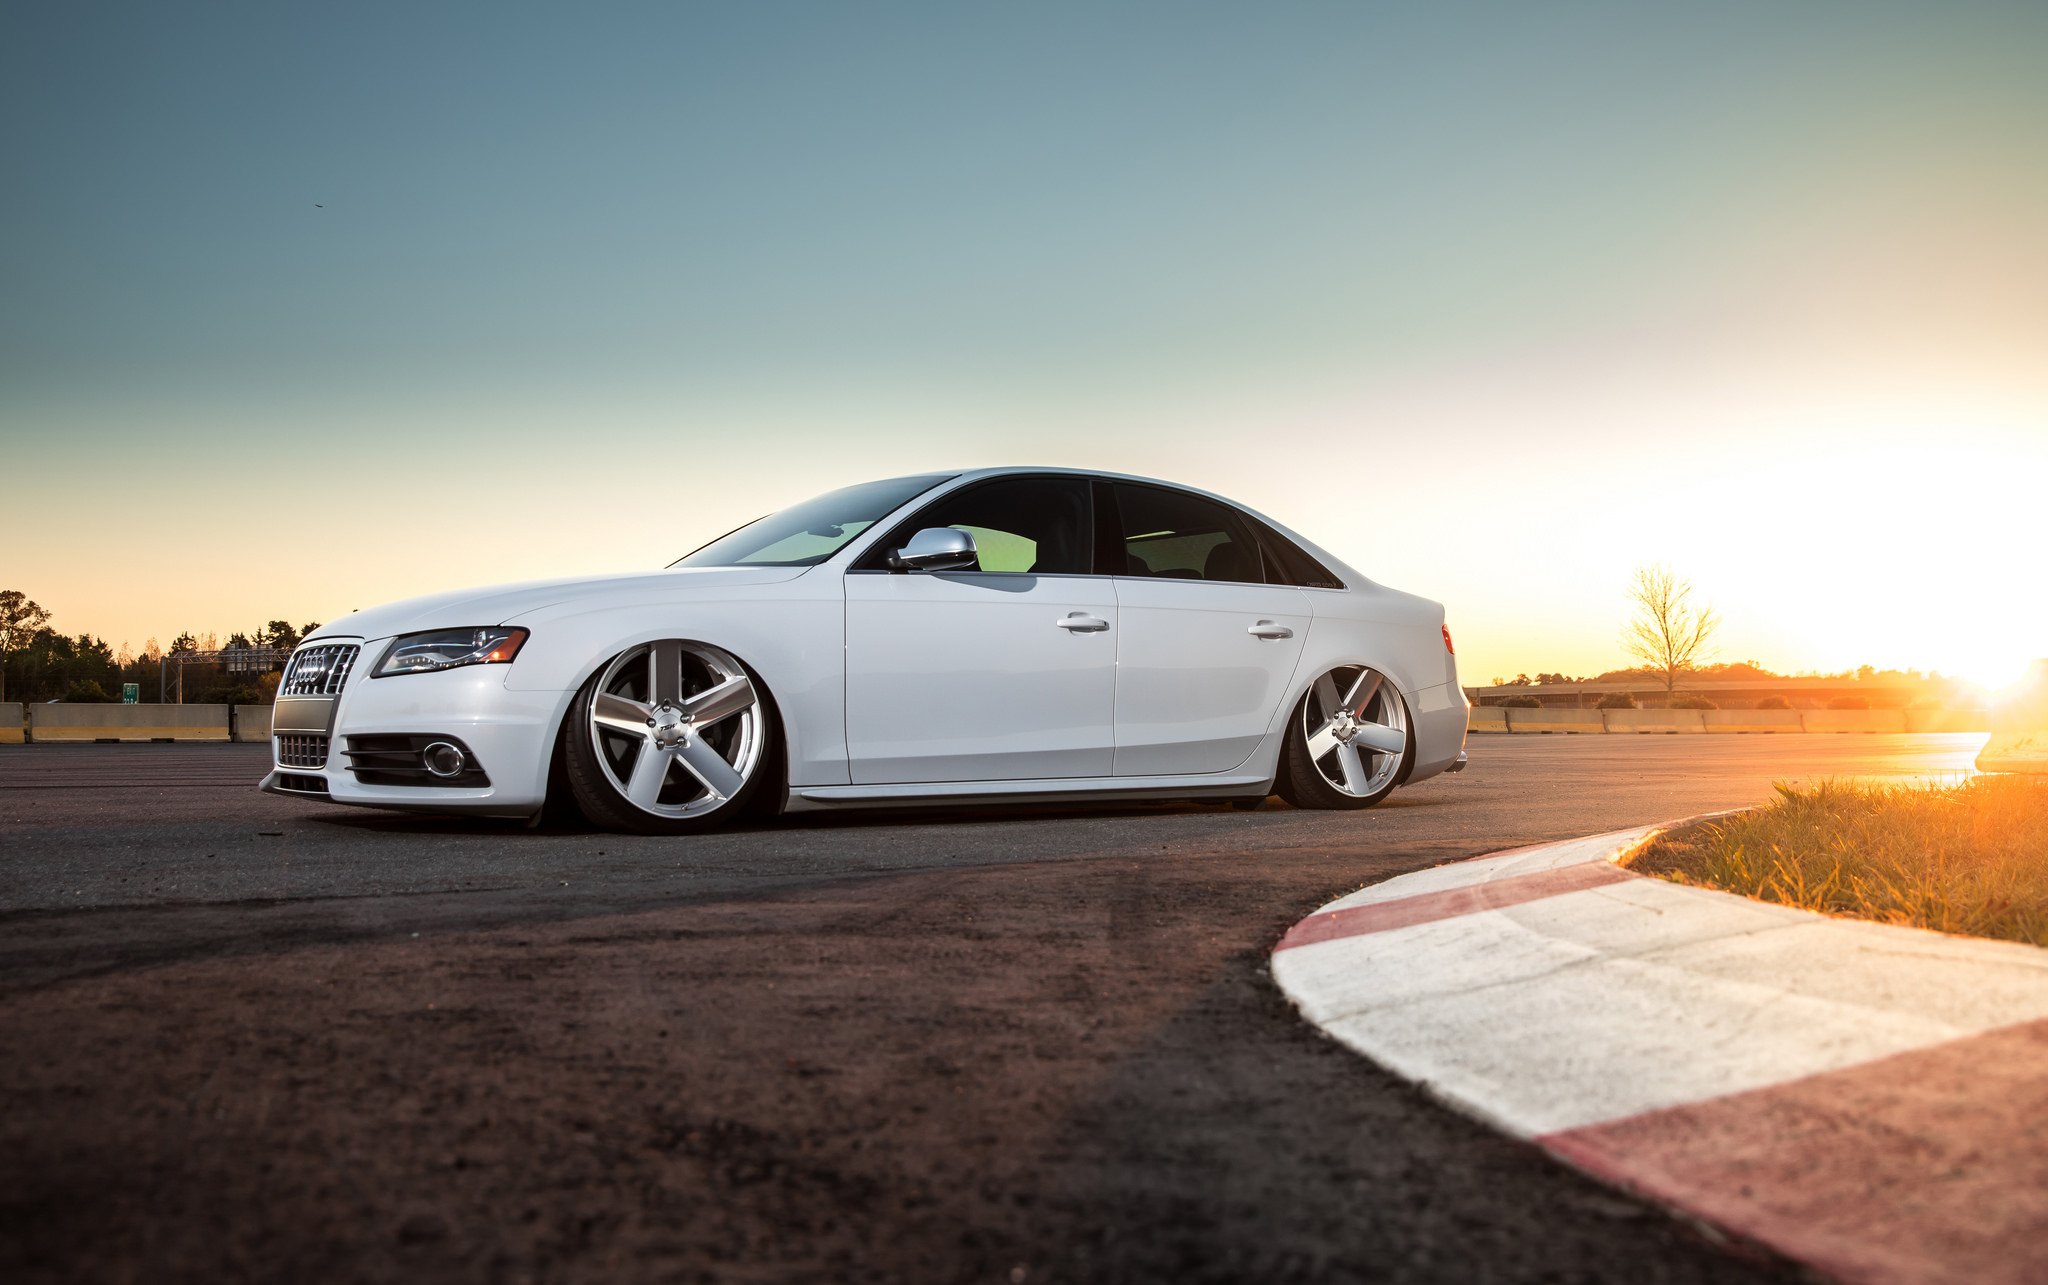 Front Bumper with Fog Lights on White Audi S4 - Photo by TSW